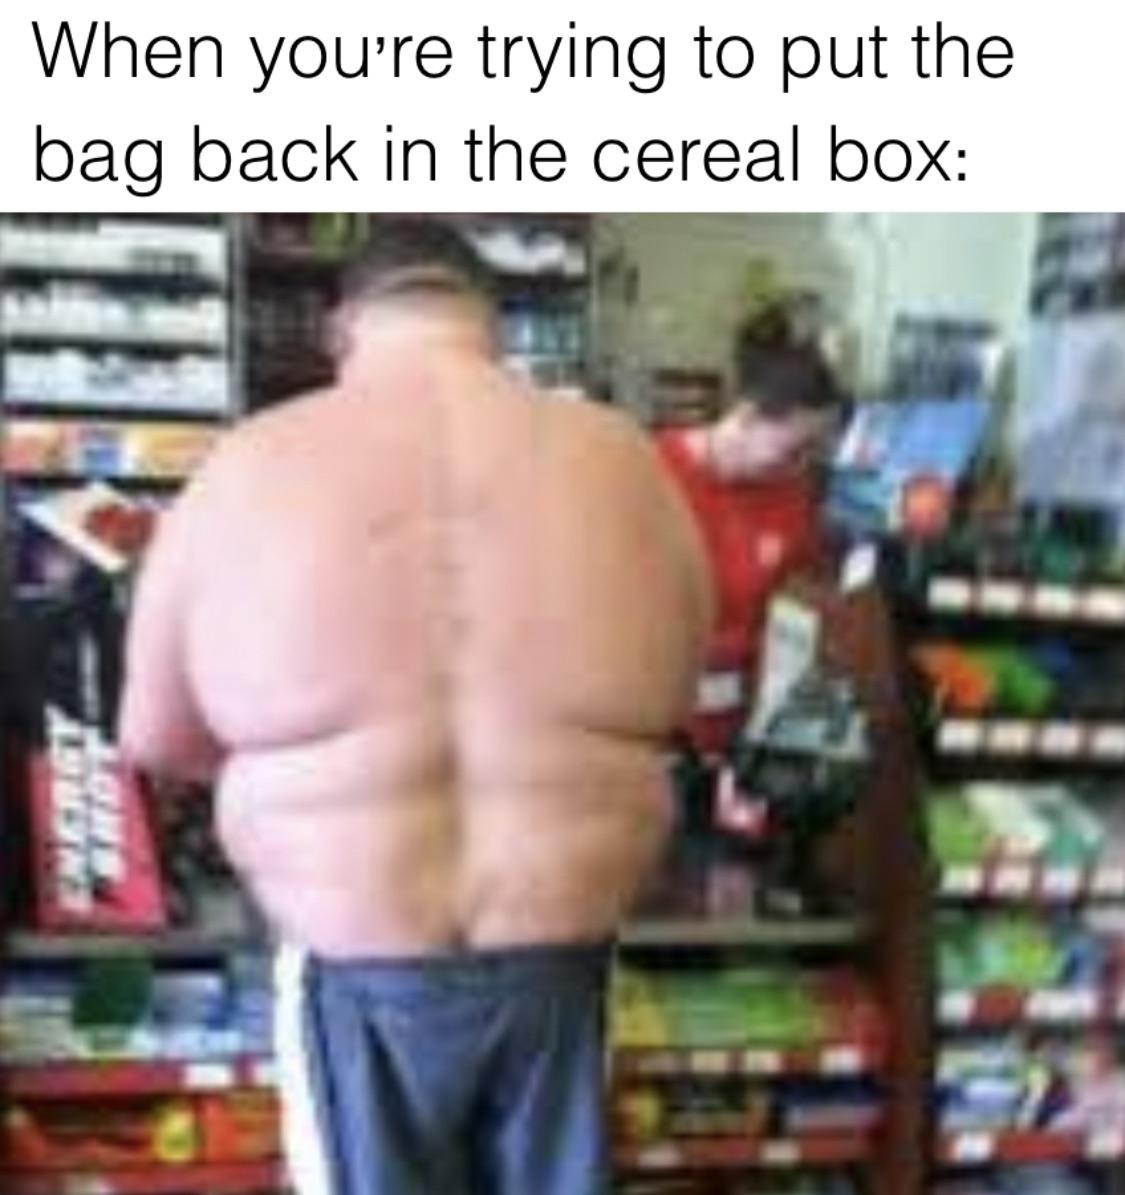 funny memes - dank memes - funny fat guy - When you're trying to put the bag back in the cereal box Energy